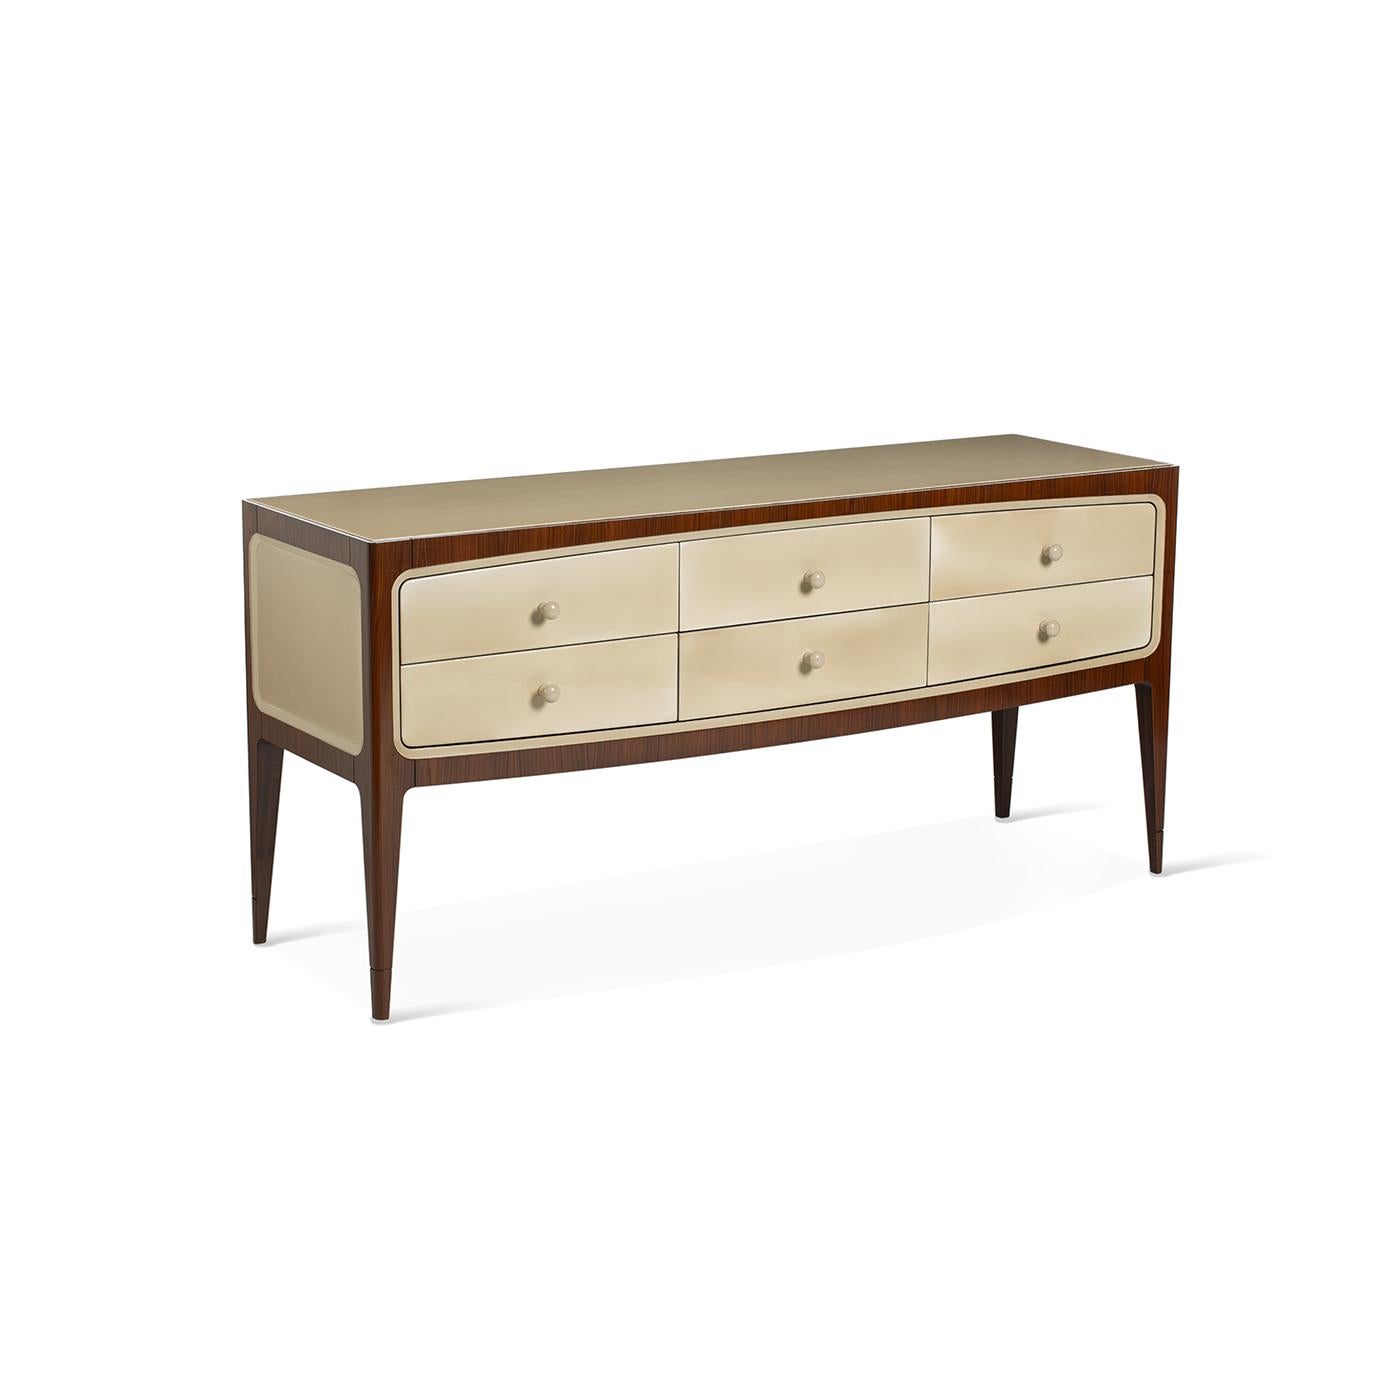 A sideboard with drawers with the classic style of the 60s. In total it has 5 drawers sliding on metal guides and 1 folding desk in the center. The structure is in beechwood and rosewood veneering, while the front, the top, and the sides are made in